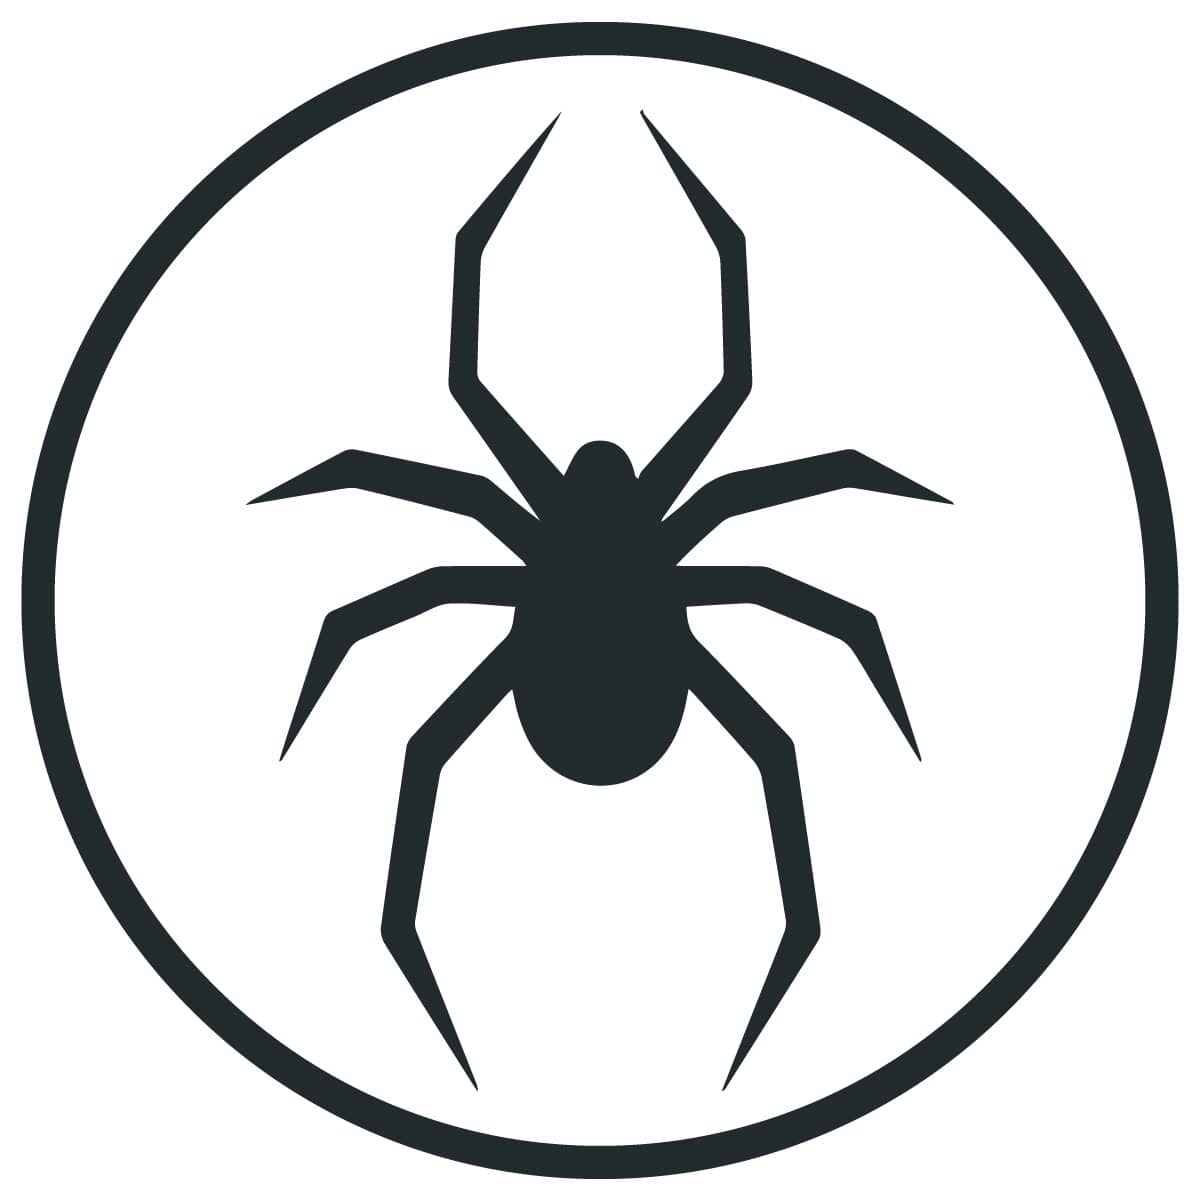 Spider pest control service in sydney for homes and businesses